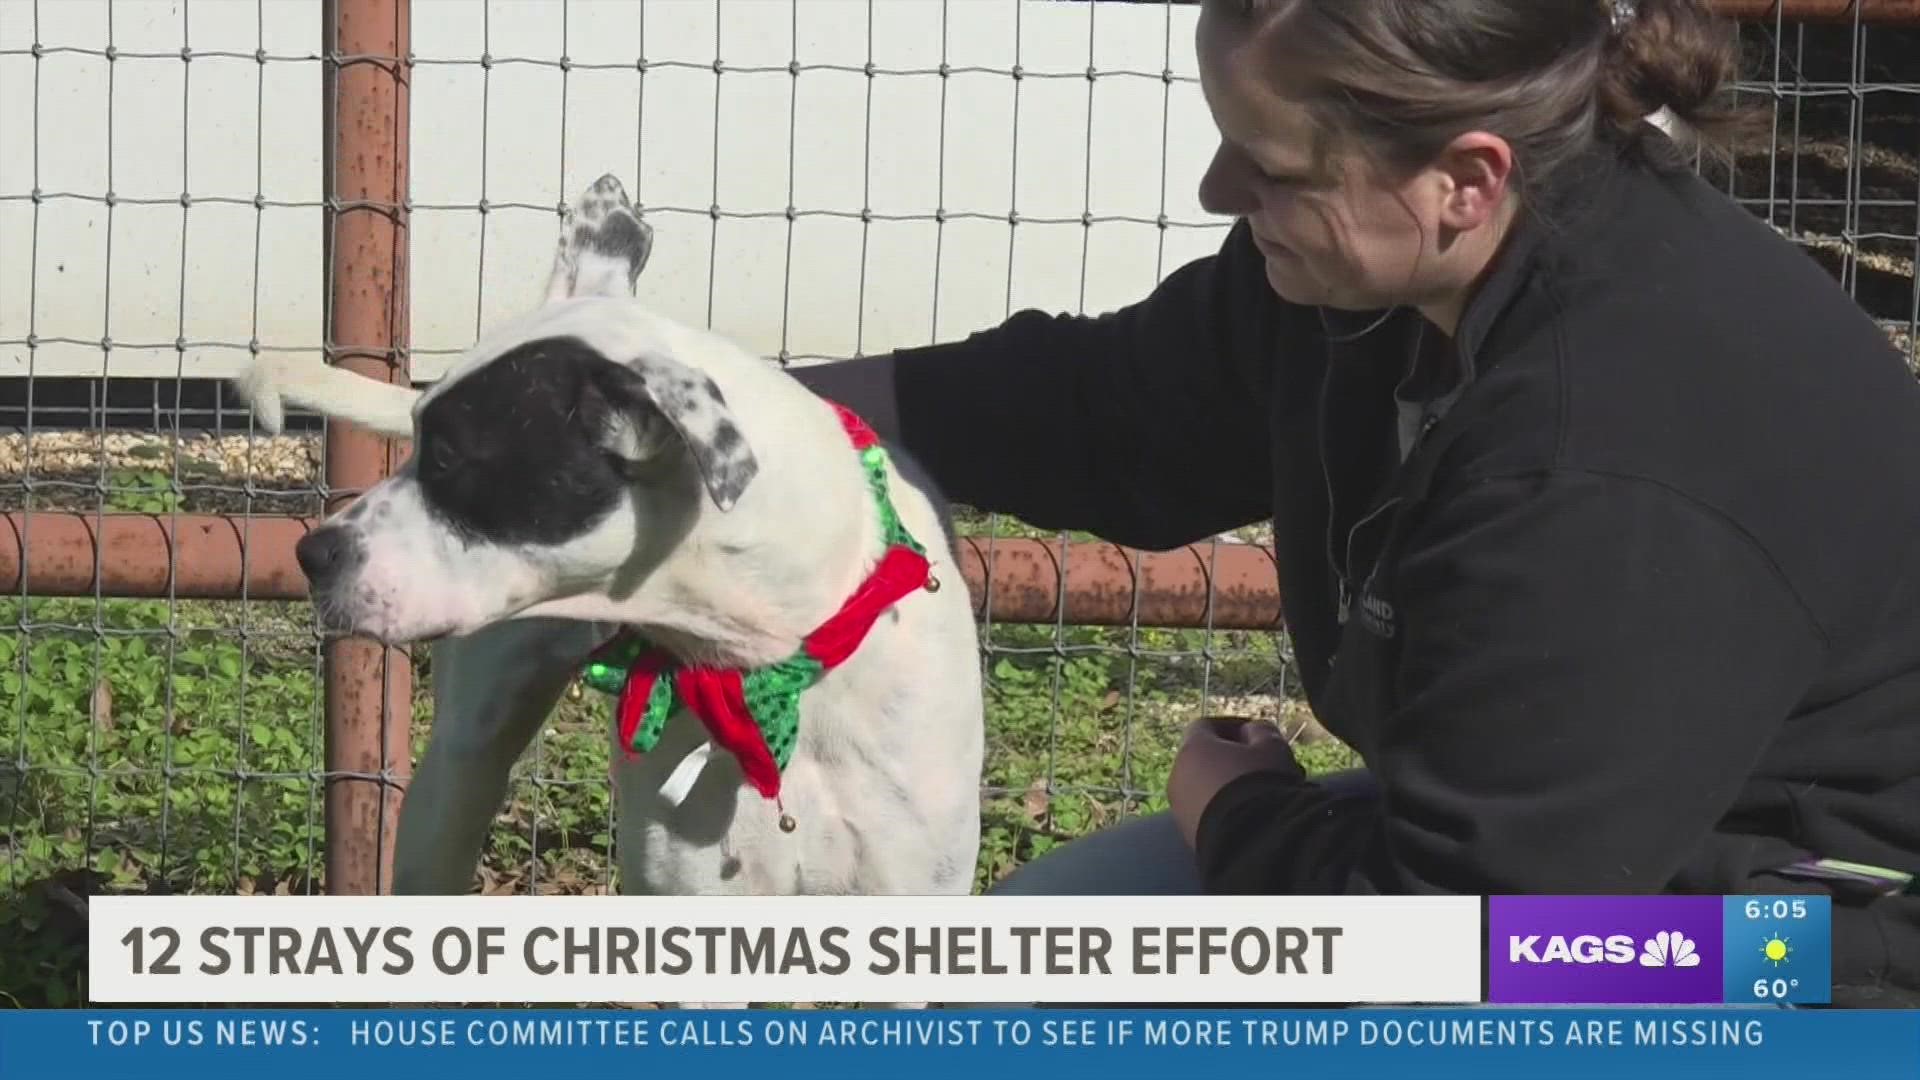 The shelter is holding their 12 Strays of Christmas offer until Dec. 23.